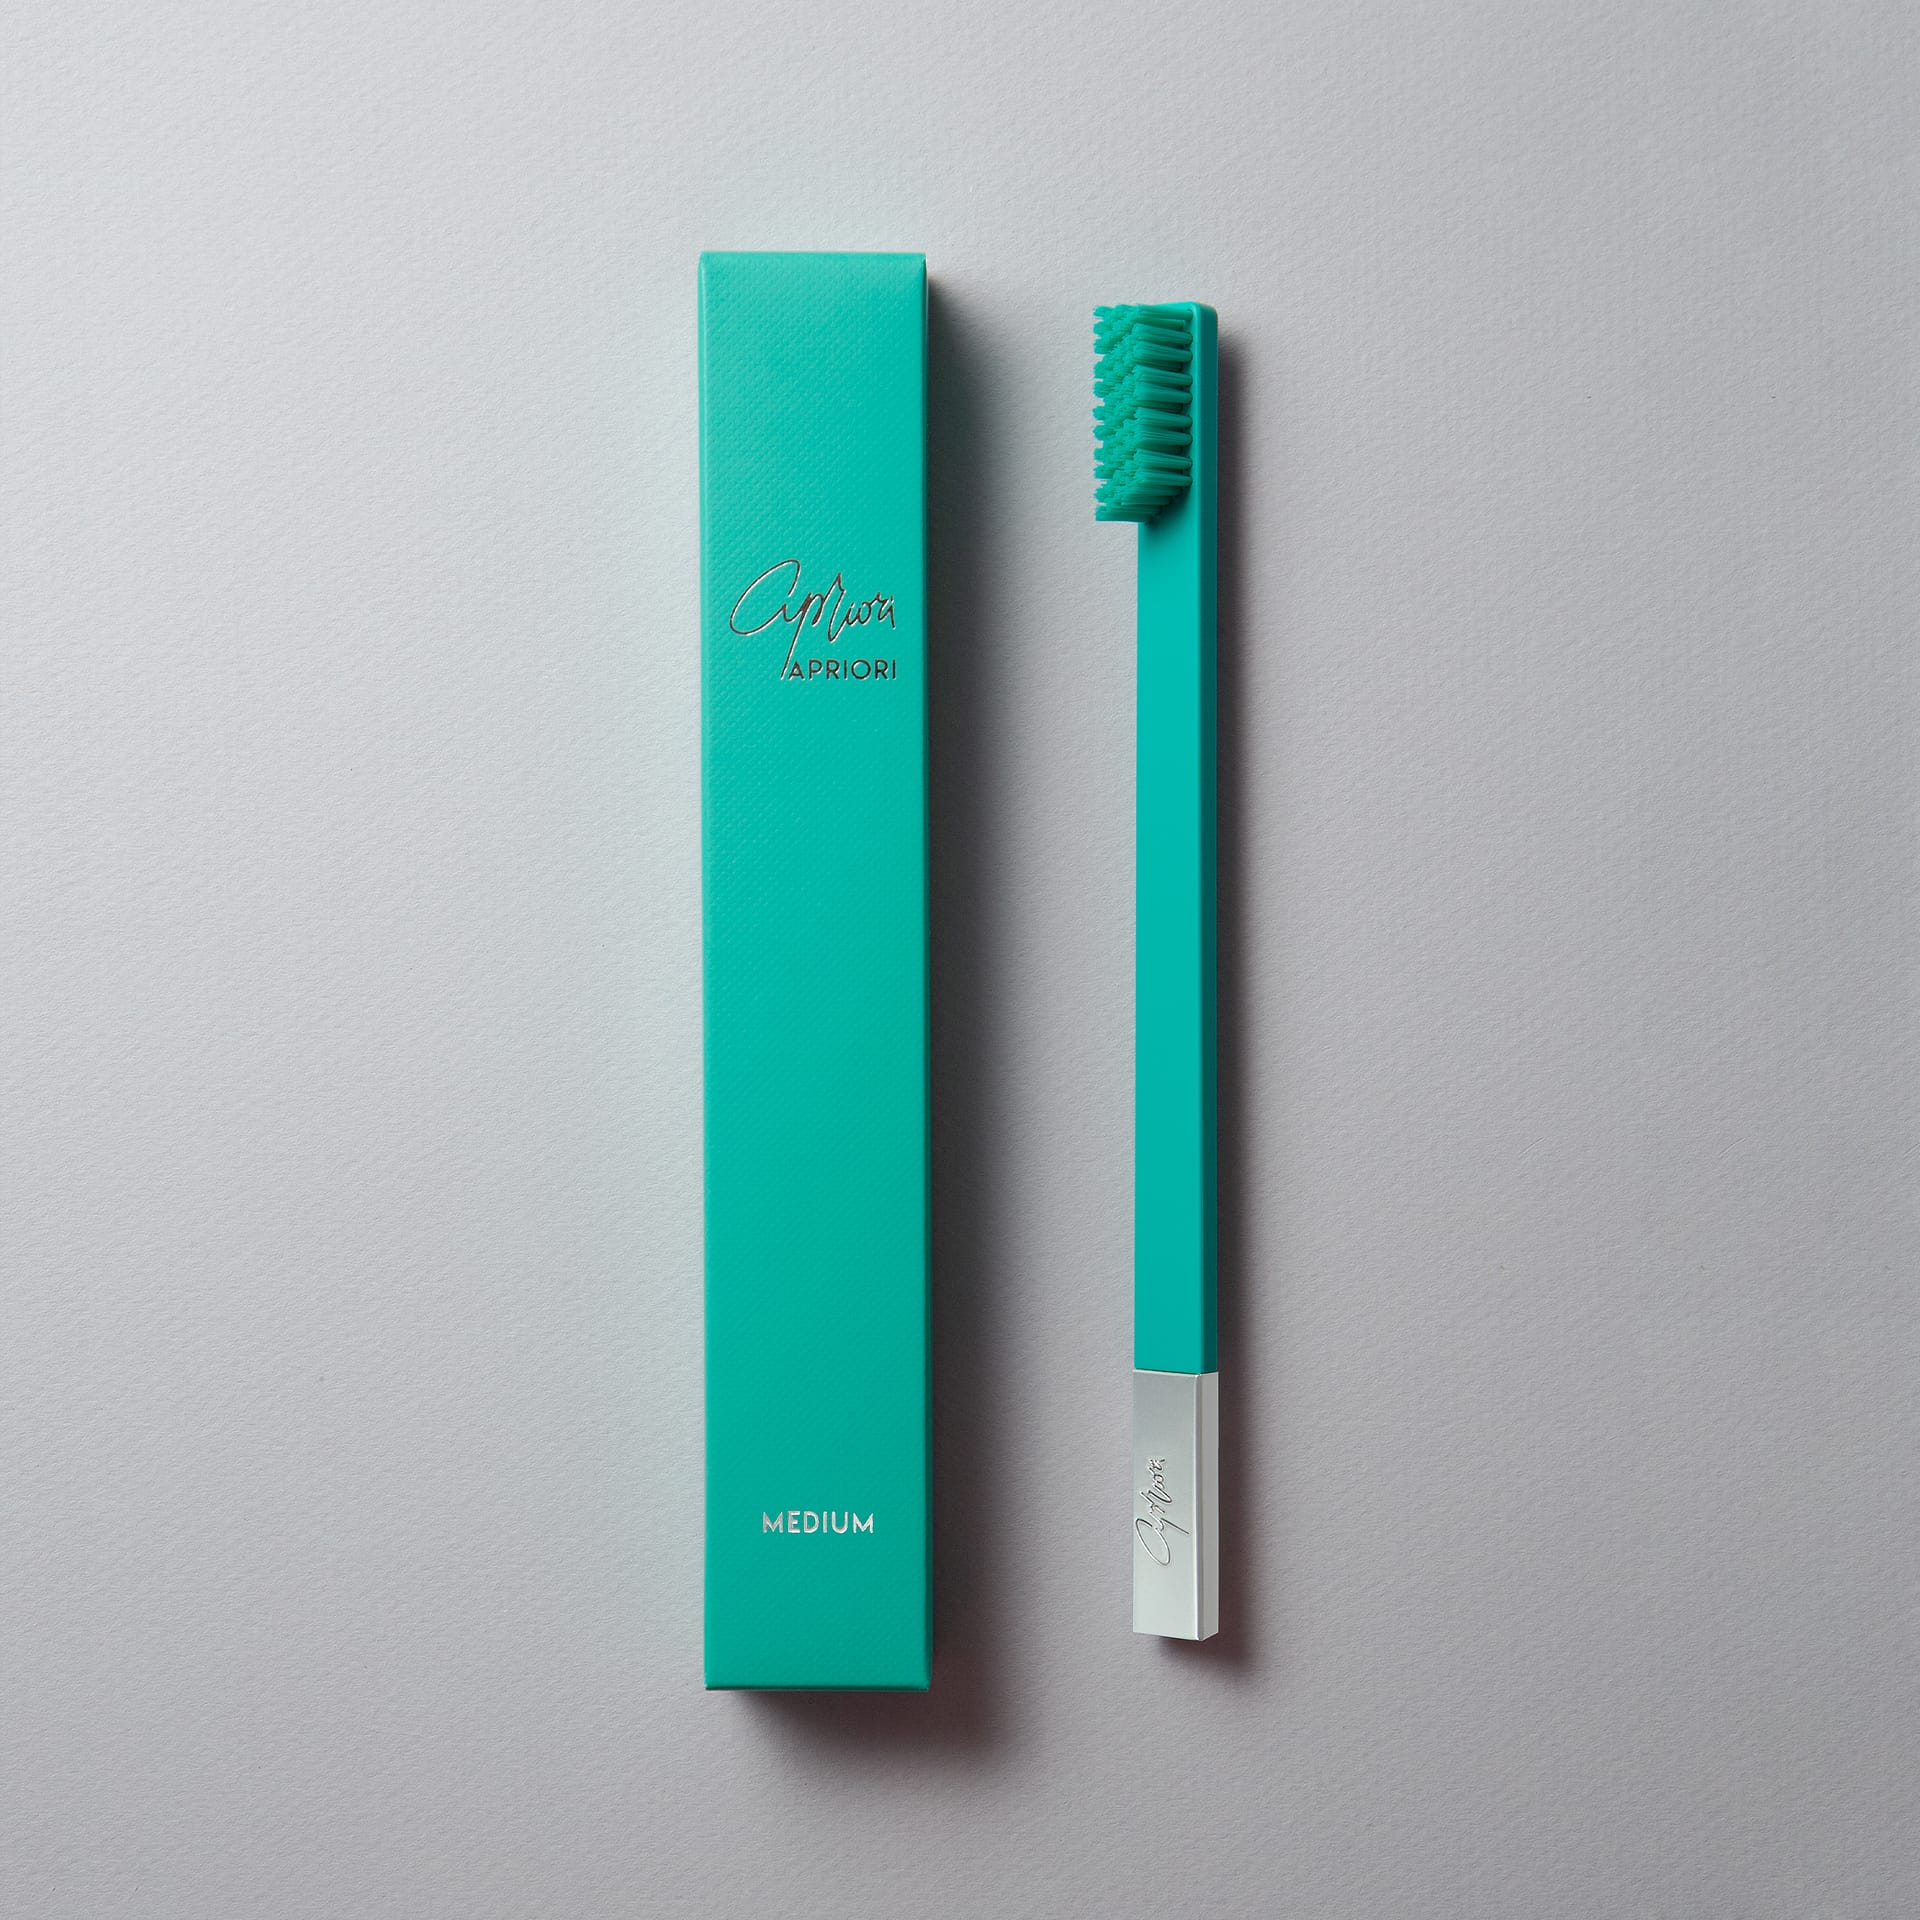 slim-by-apriori-turquoise-blue-silver-toothbrush-2023